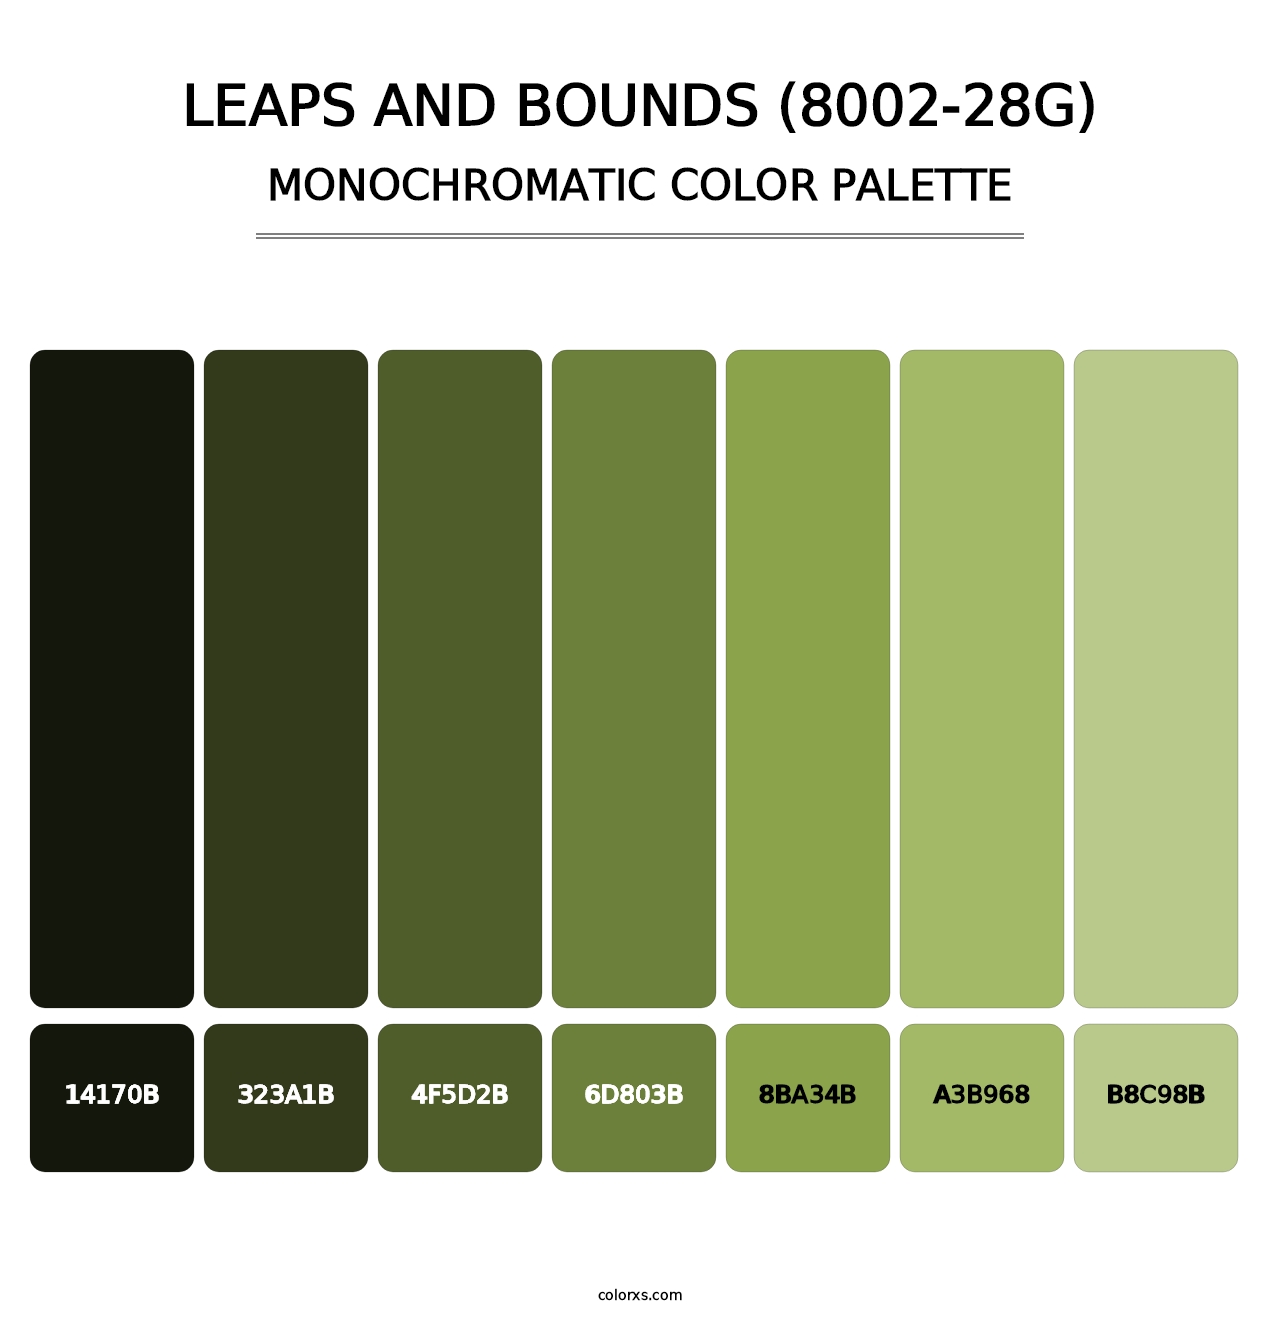 Leaps and Bounds (8002-28G) - Monochromatic Color Palette